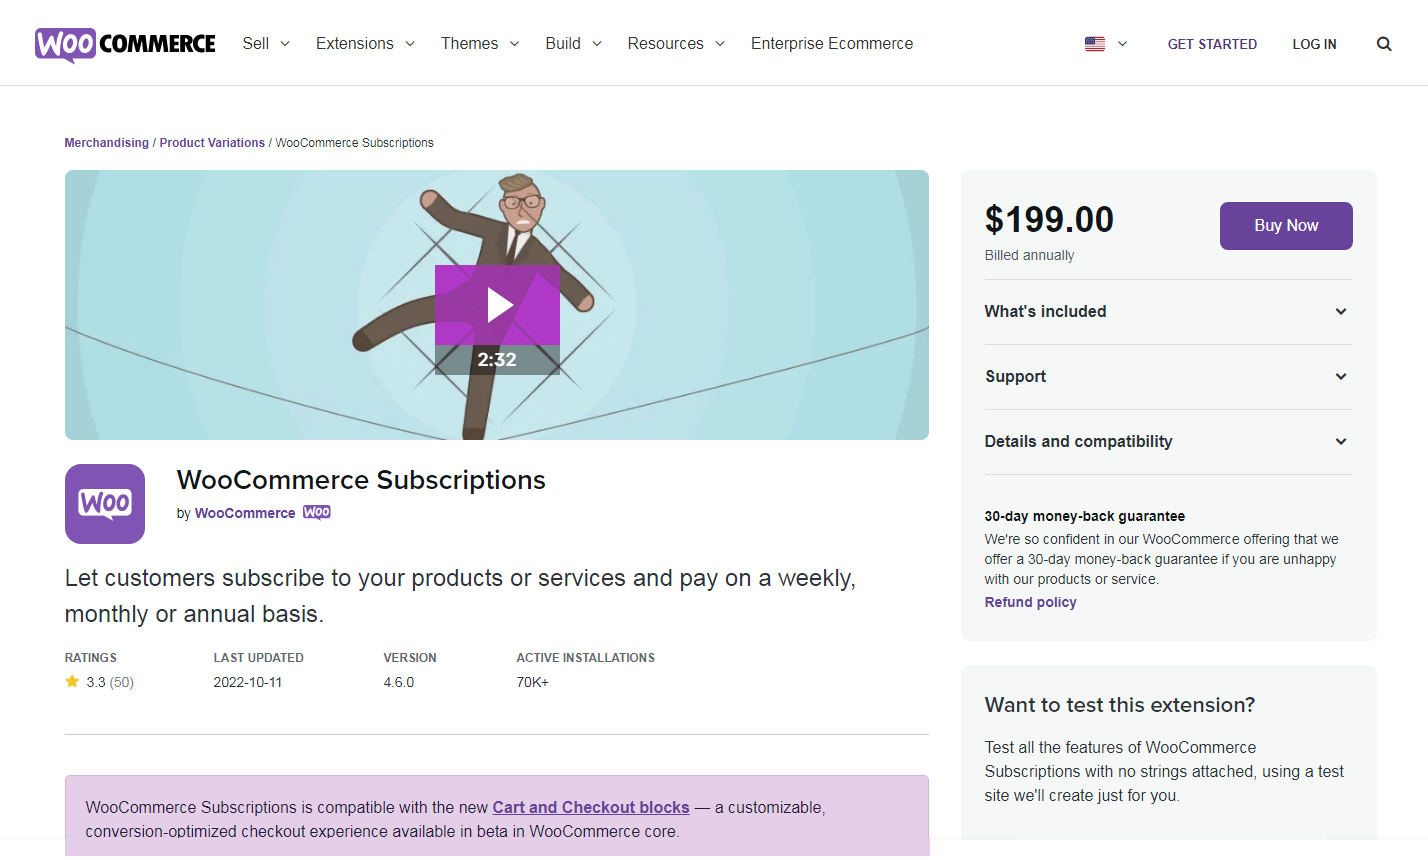 WooCommerce Subscription feature